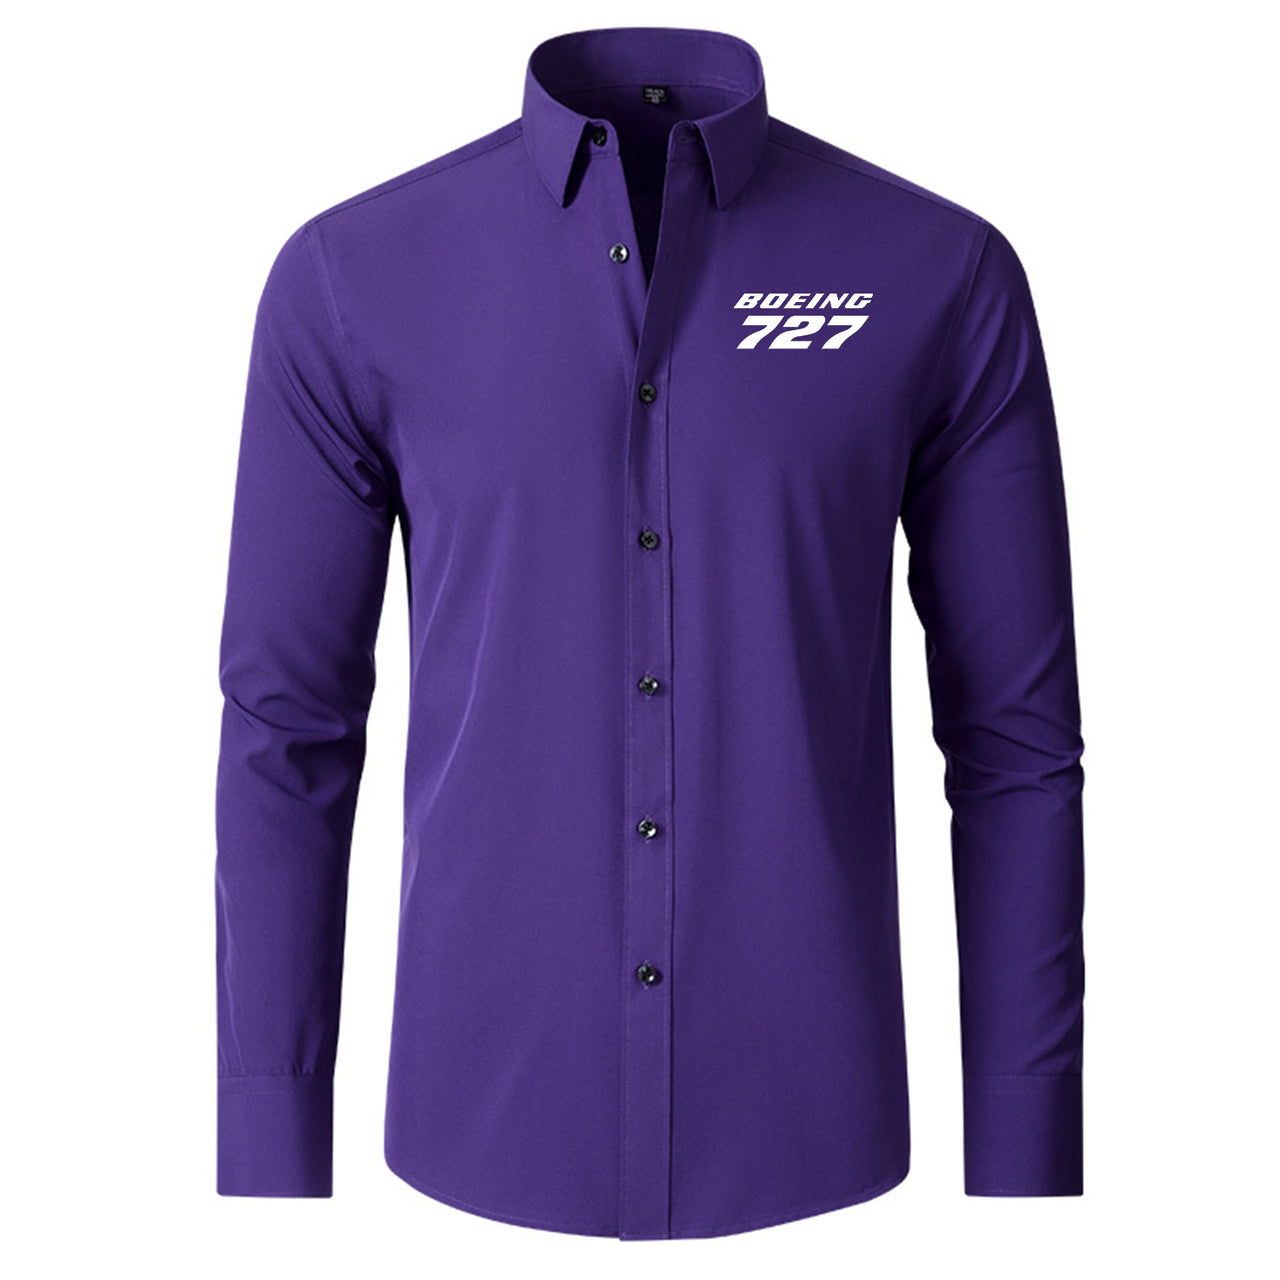 Boeing 727 & Text Designed Long Sleeve Shirts